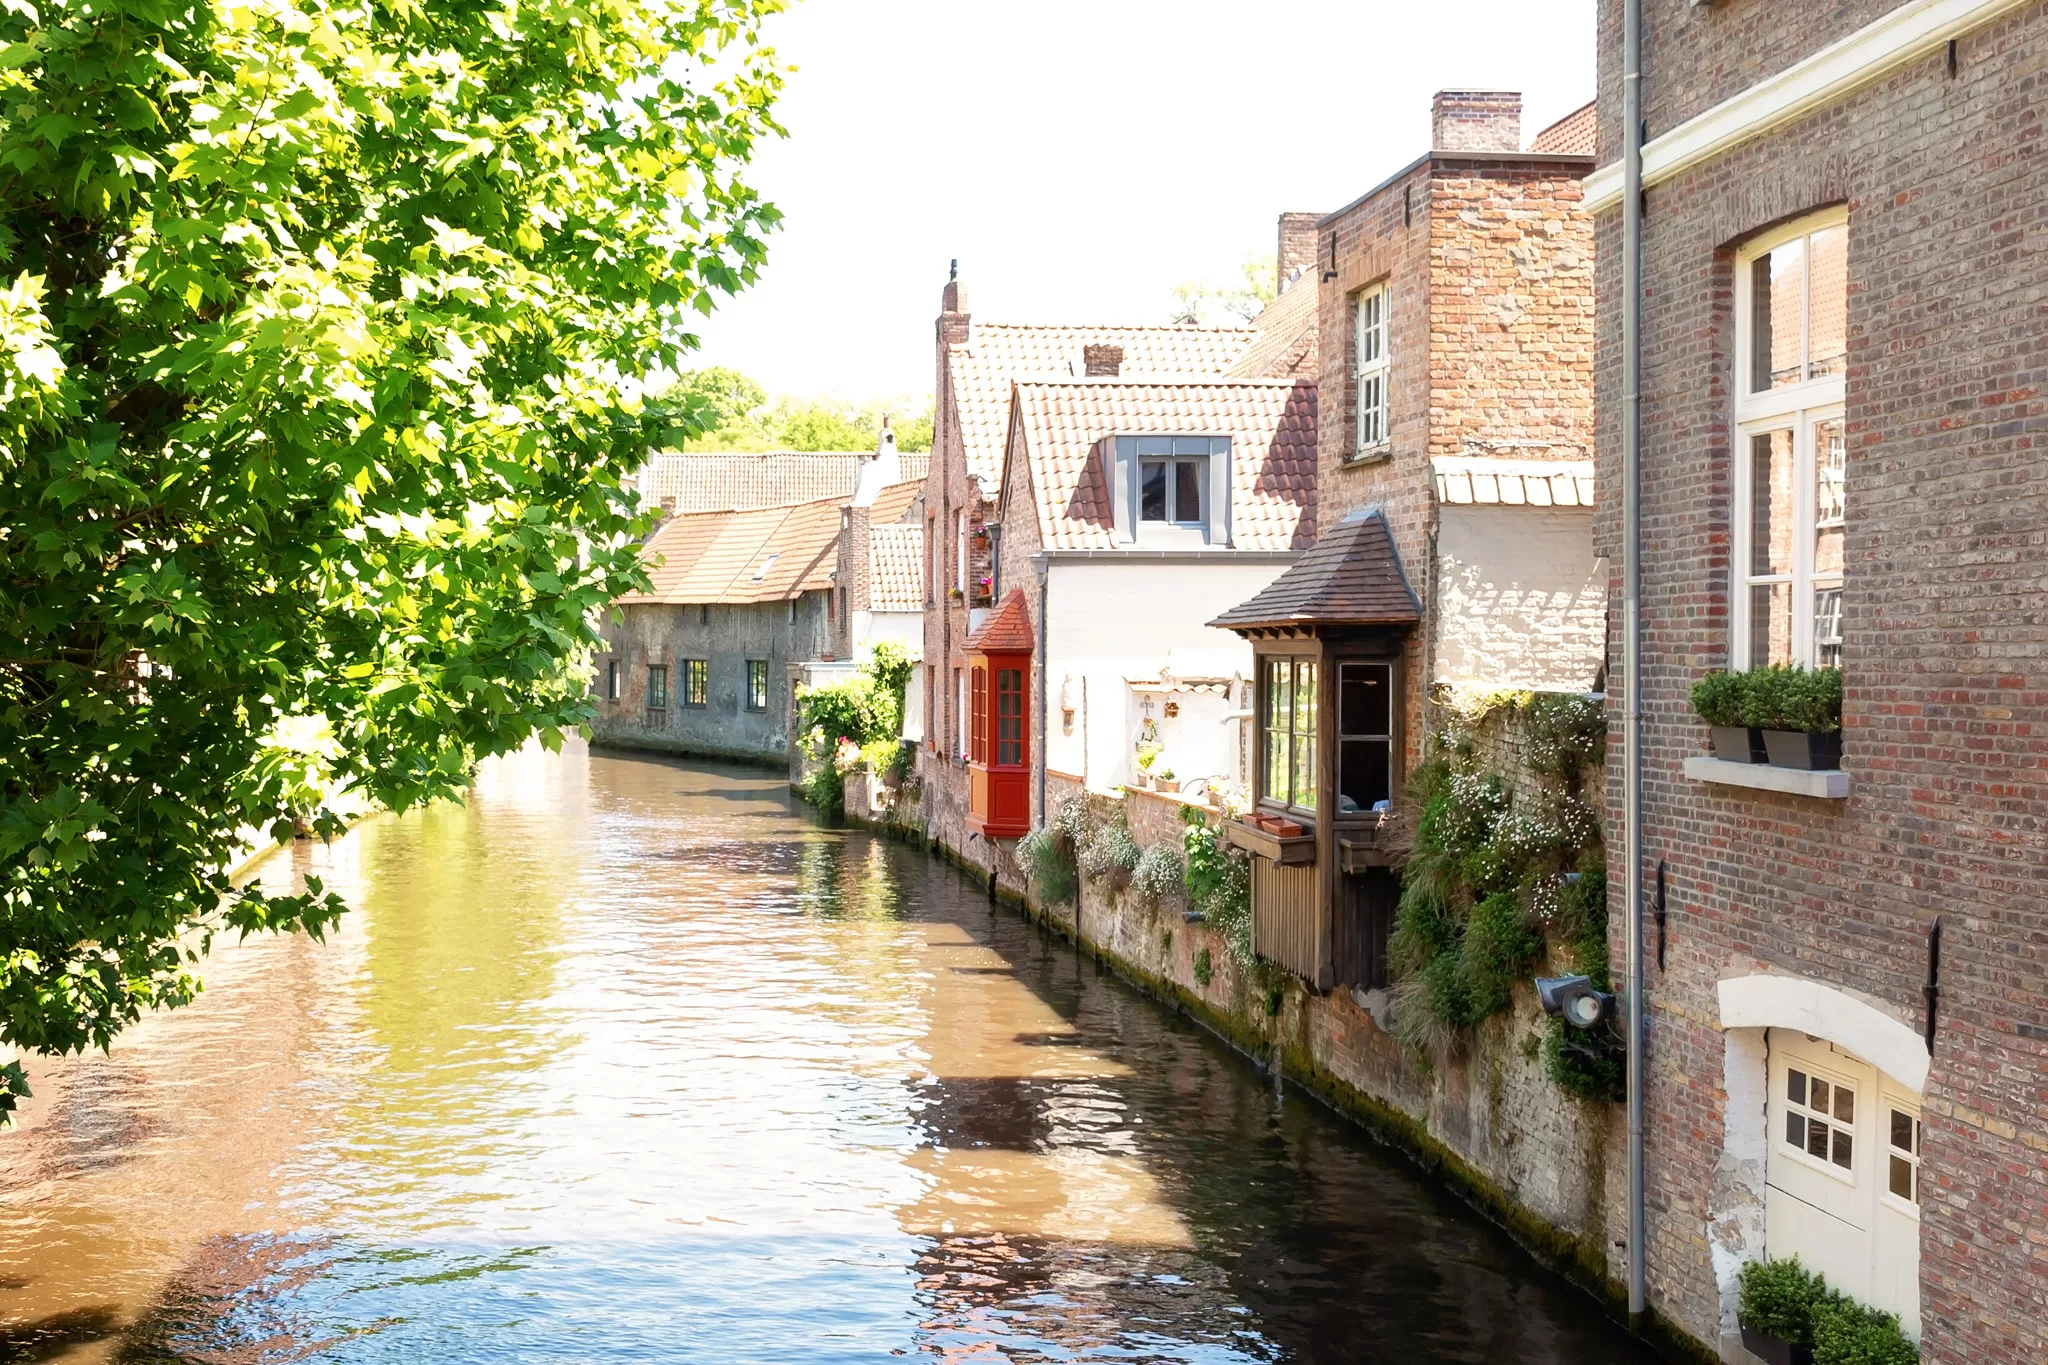 This Bruges Day Trip Itinerary Image shows the canals that run through Bruges with historic homes and greenery hanging over the edge along the water